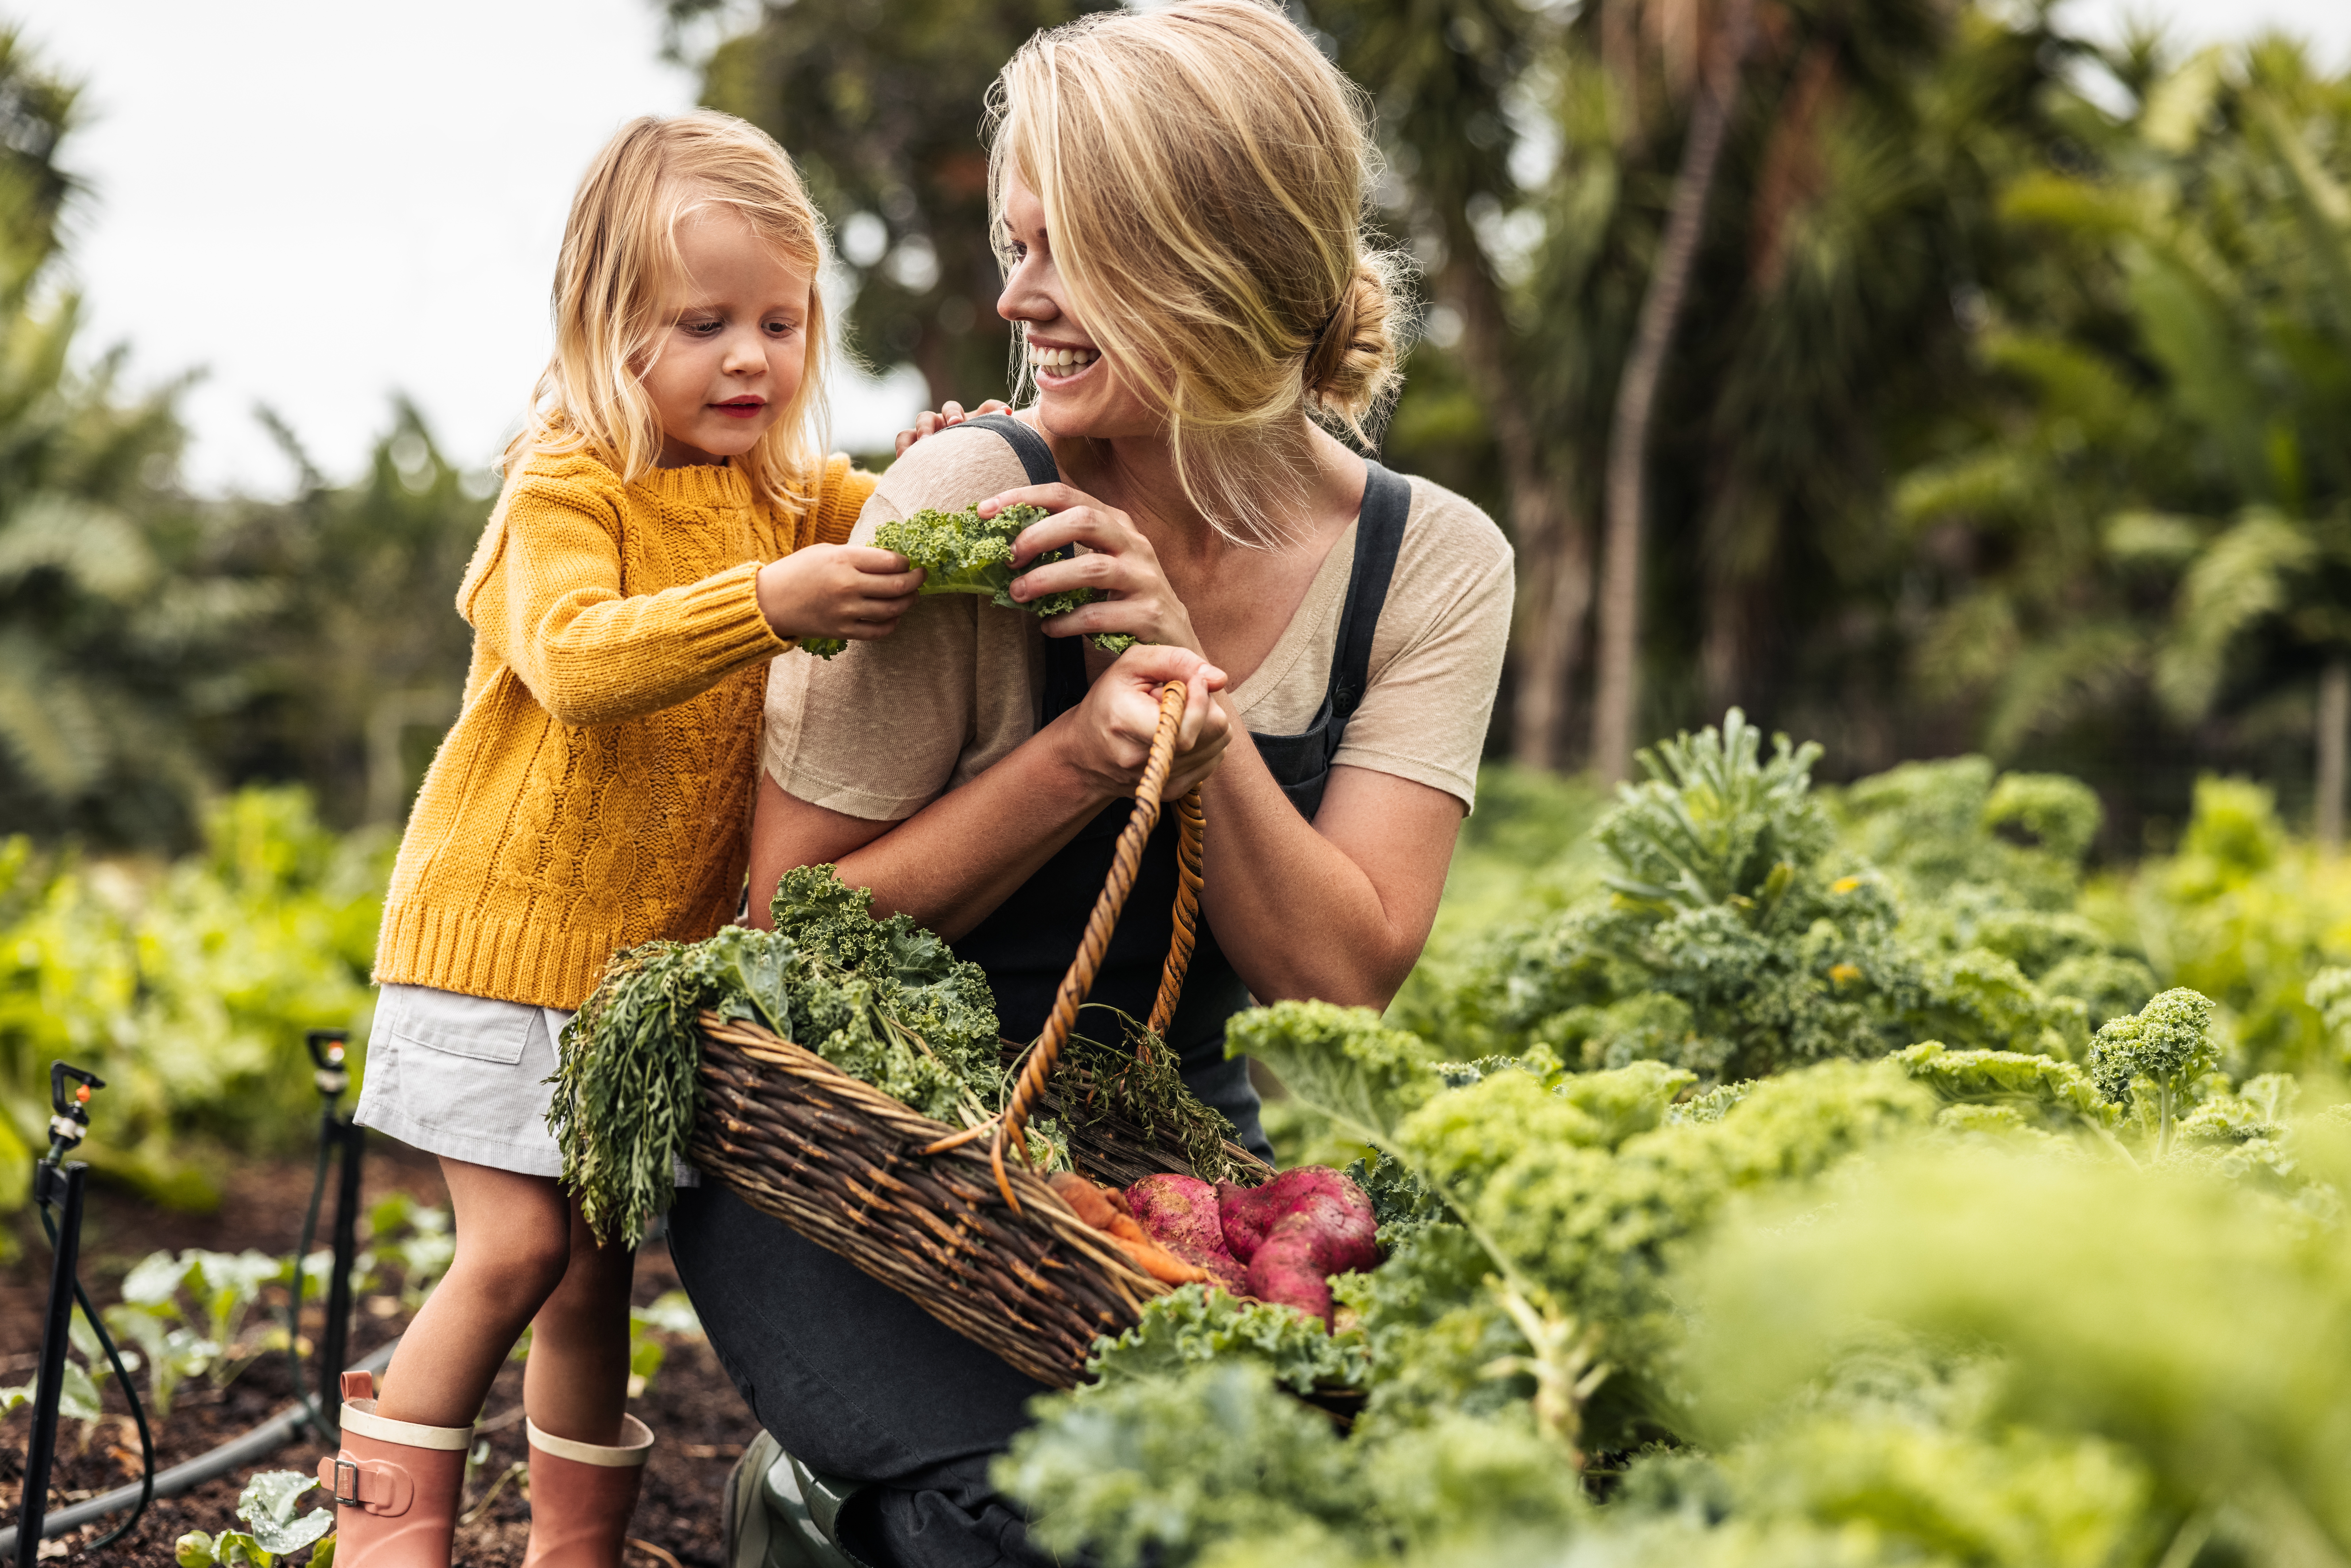 sweet image of mum and daughter gardening together